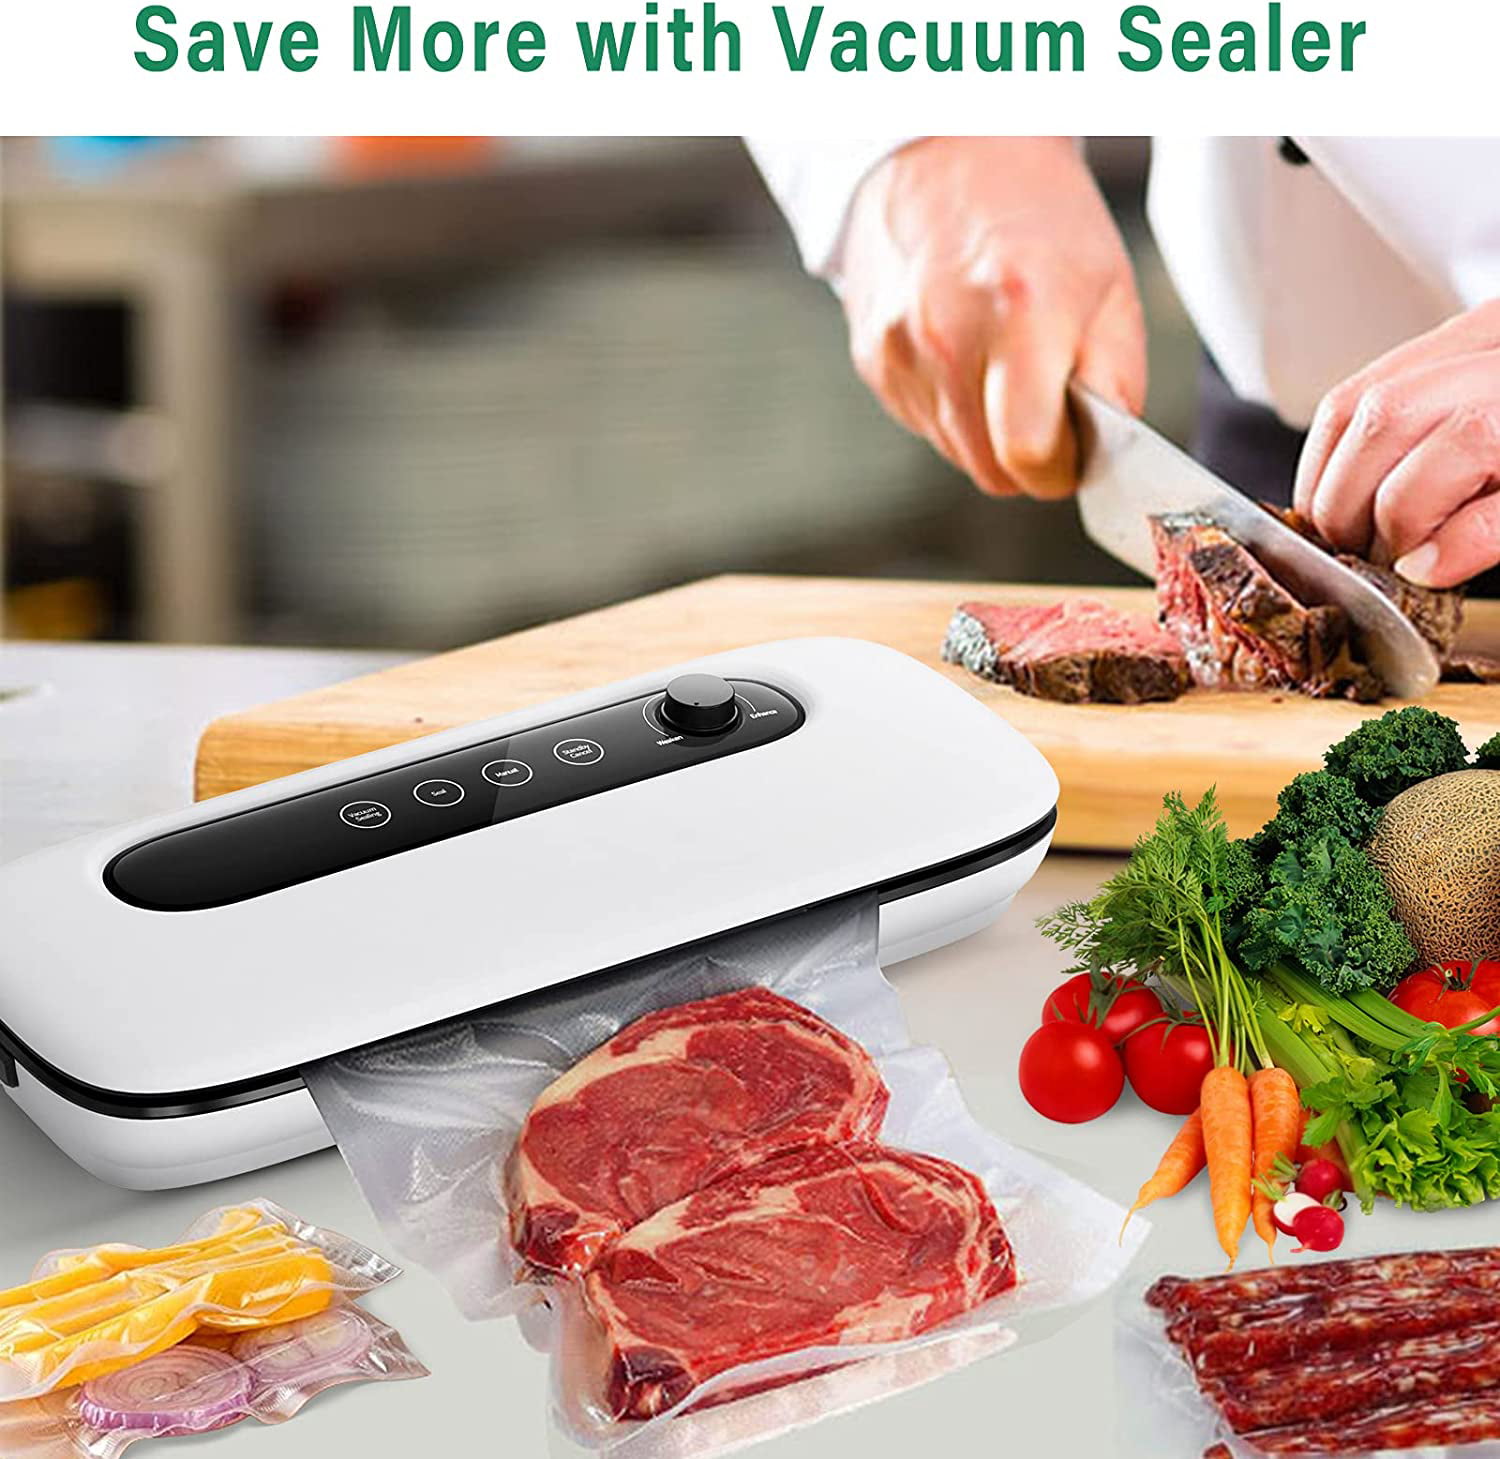  Full Automatic Vacuum Sealer Machine GHVACZS AP-18 Food Vacuum  Sealer with 7MM Heating wire, LED Touch Screen & Dry & Moist Food  Preservation Modes, Double Motors Bag Sealer with Starter Kit